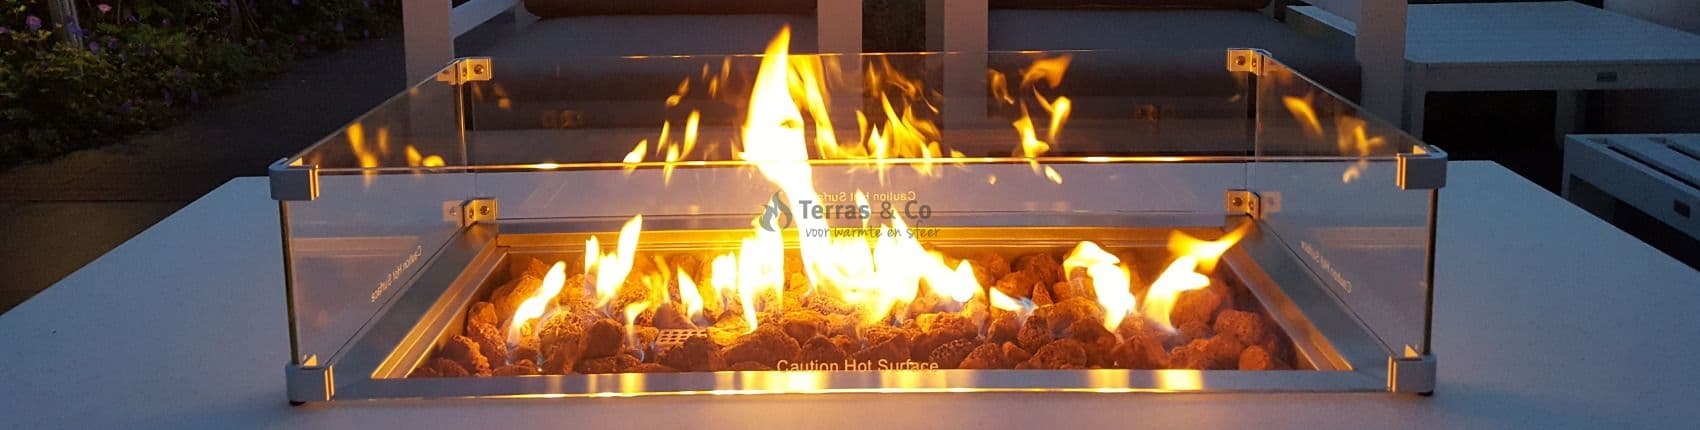 Terras & Co | the most Tables, Built-in & Patio Heaters!